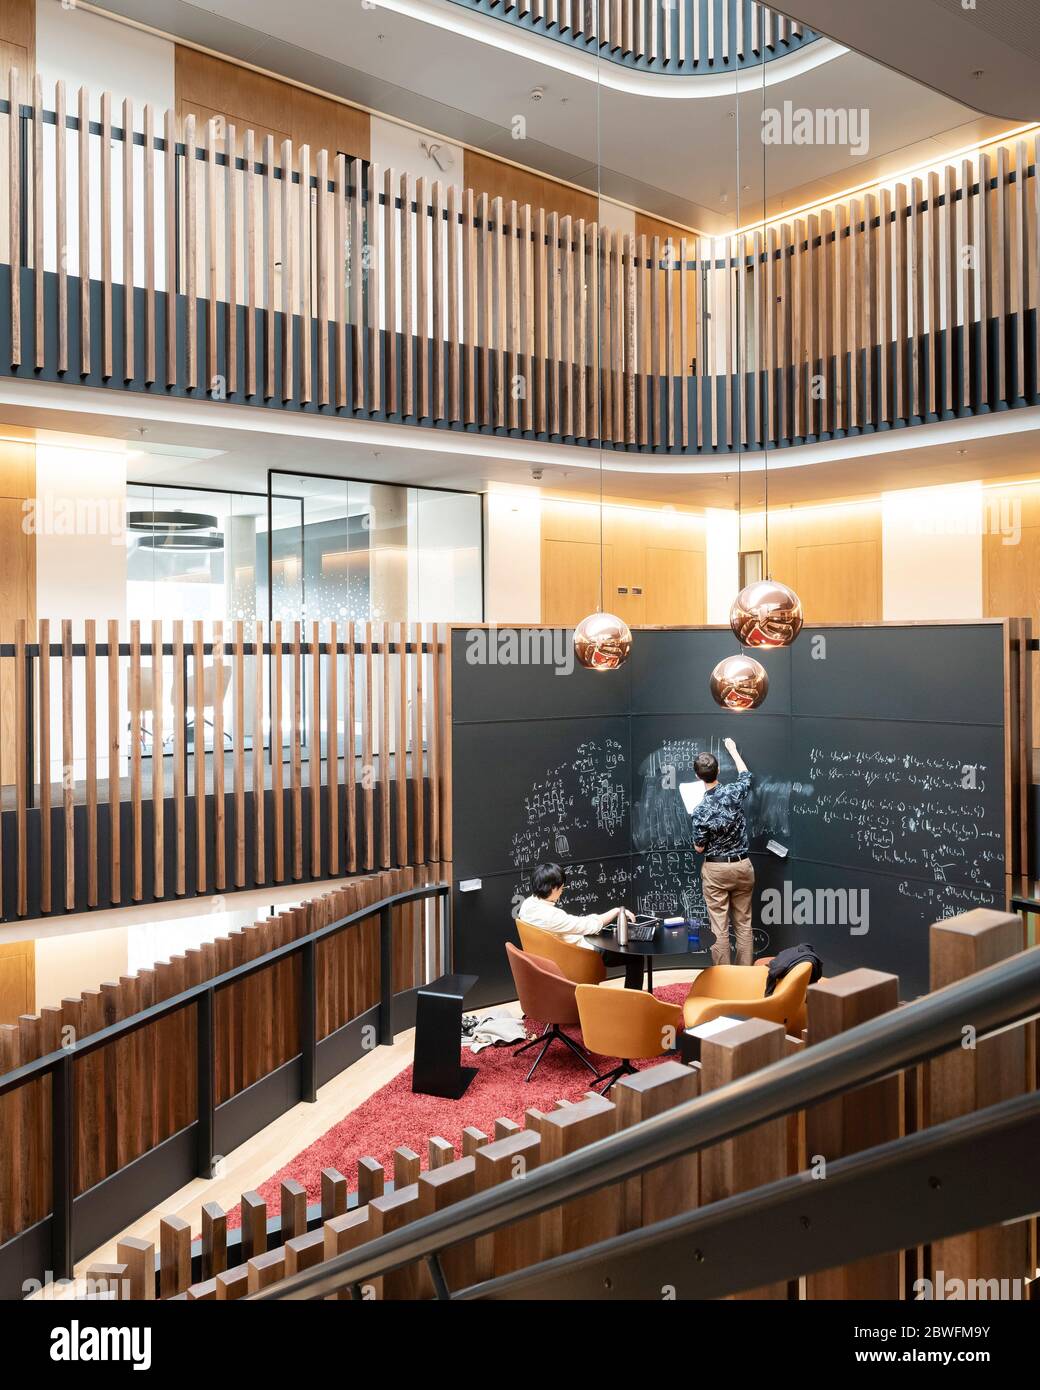 One of the atrium blackboards. Beecroft Building, Oxford, United Kingdom. Architect: Hawkins Brown Architects LLP, 2018. Stock Photo